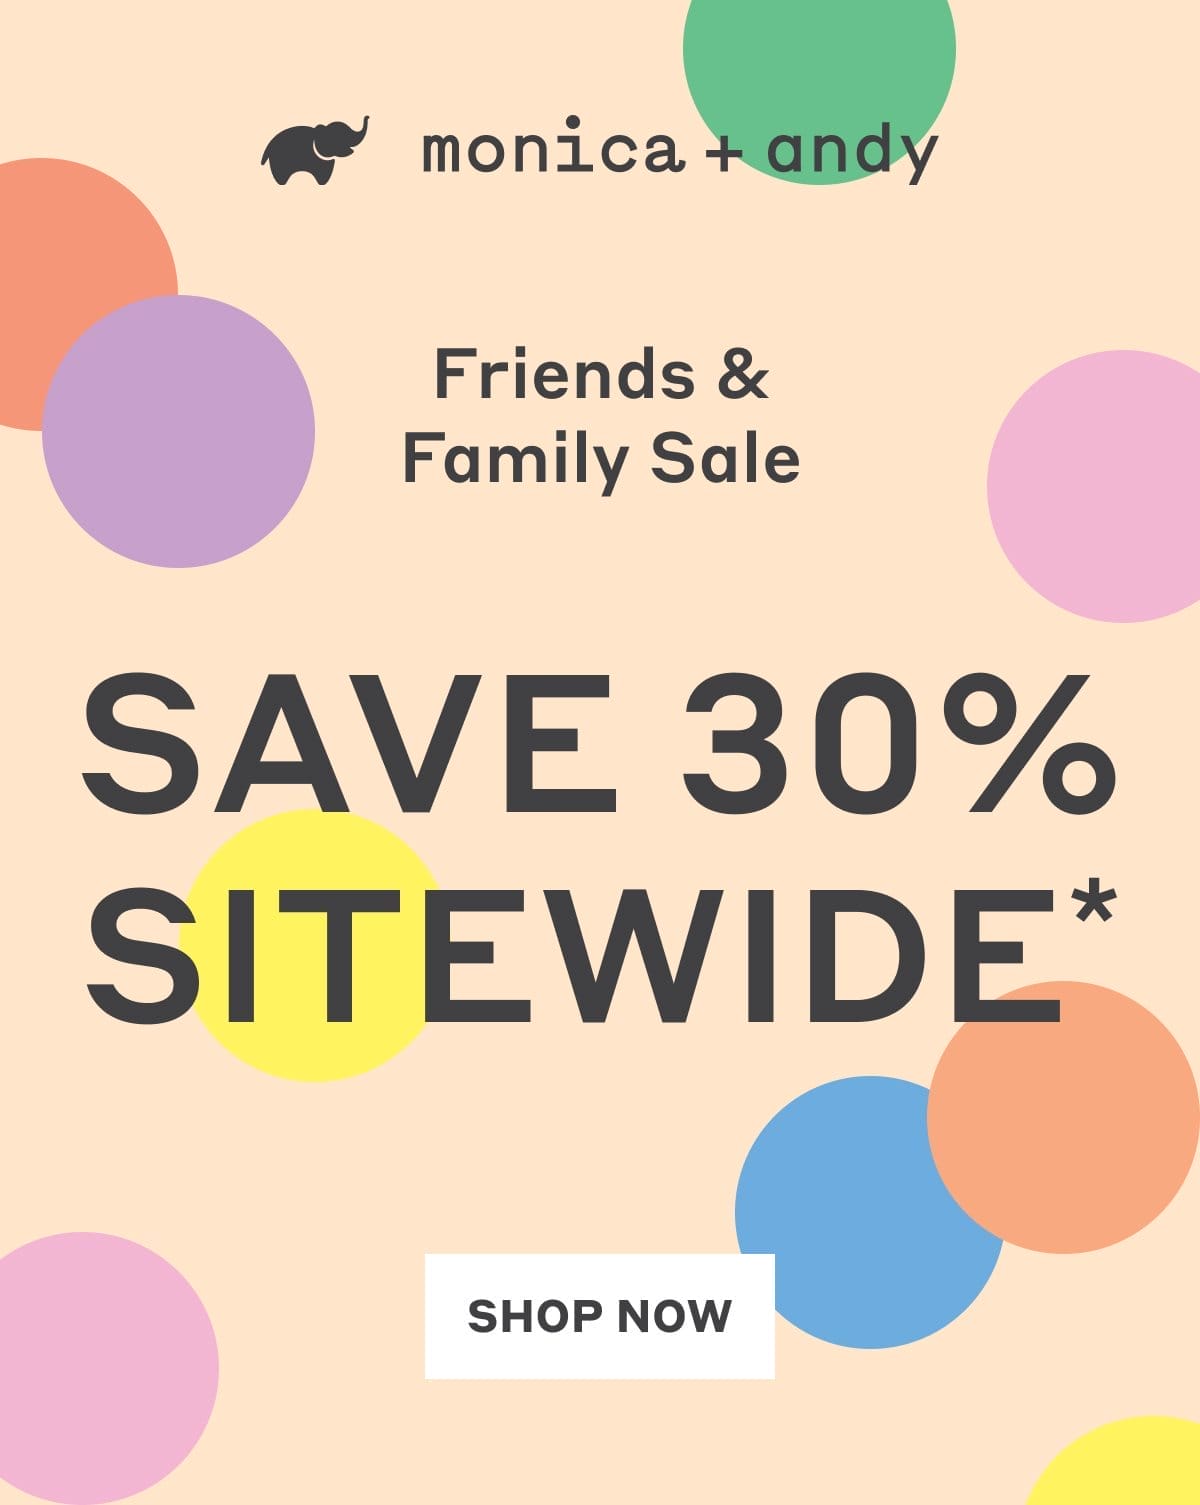 Monica + Andy: Friends & Family Sale - Save 30% Sitewide. Use code INSIDER30 now! Save on over 1,300 new spring arrivals. Shop Now